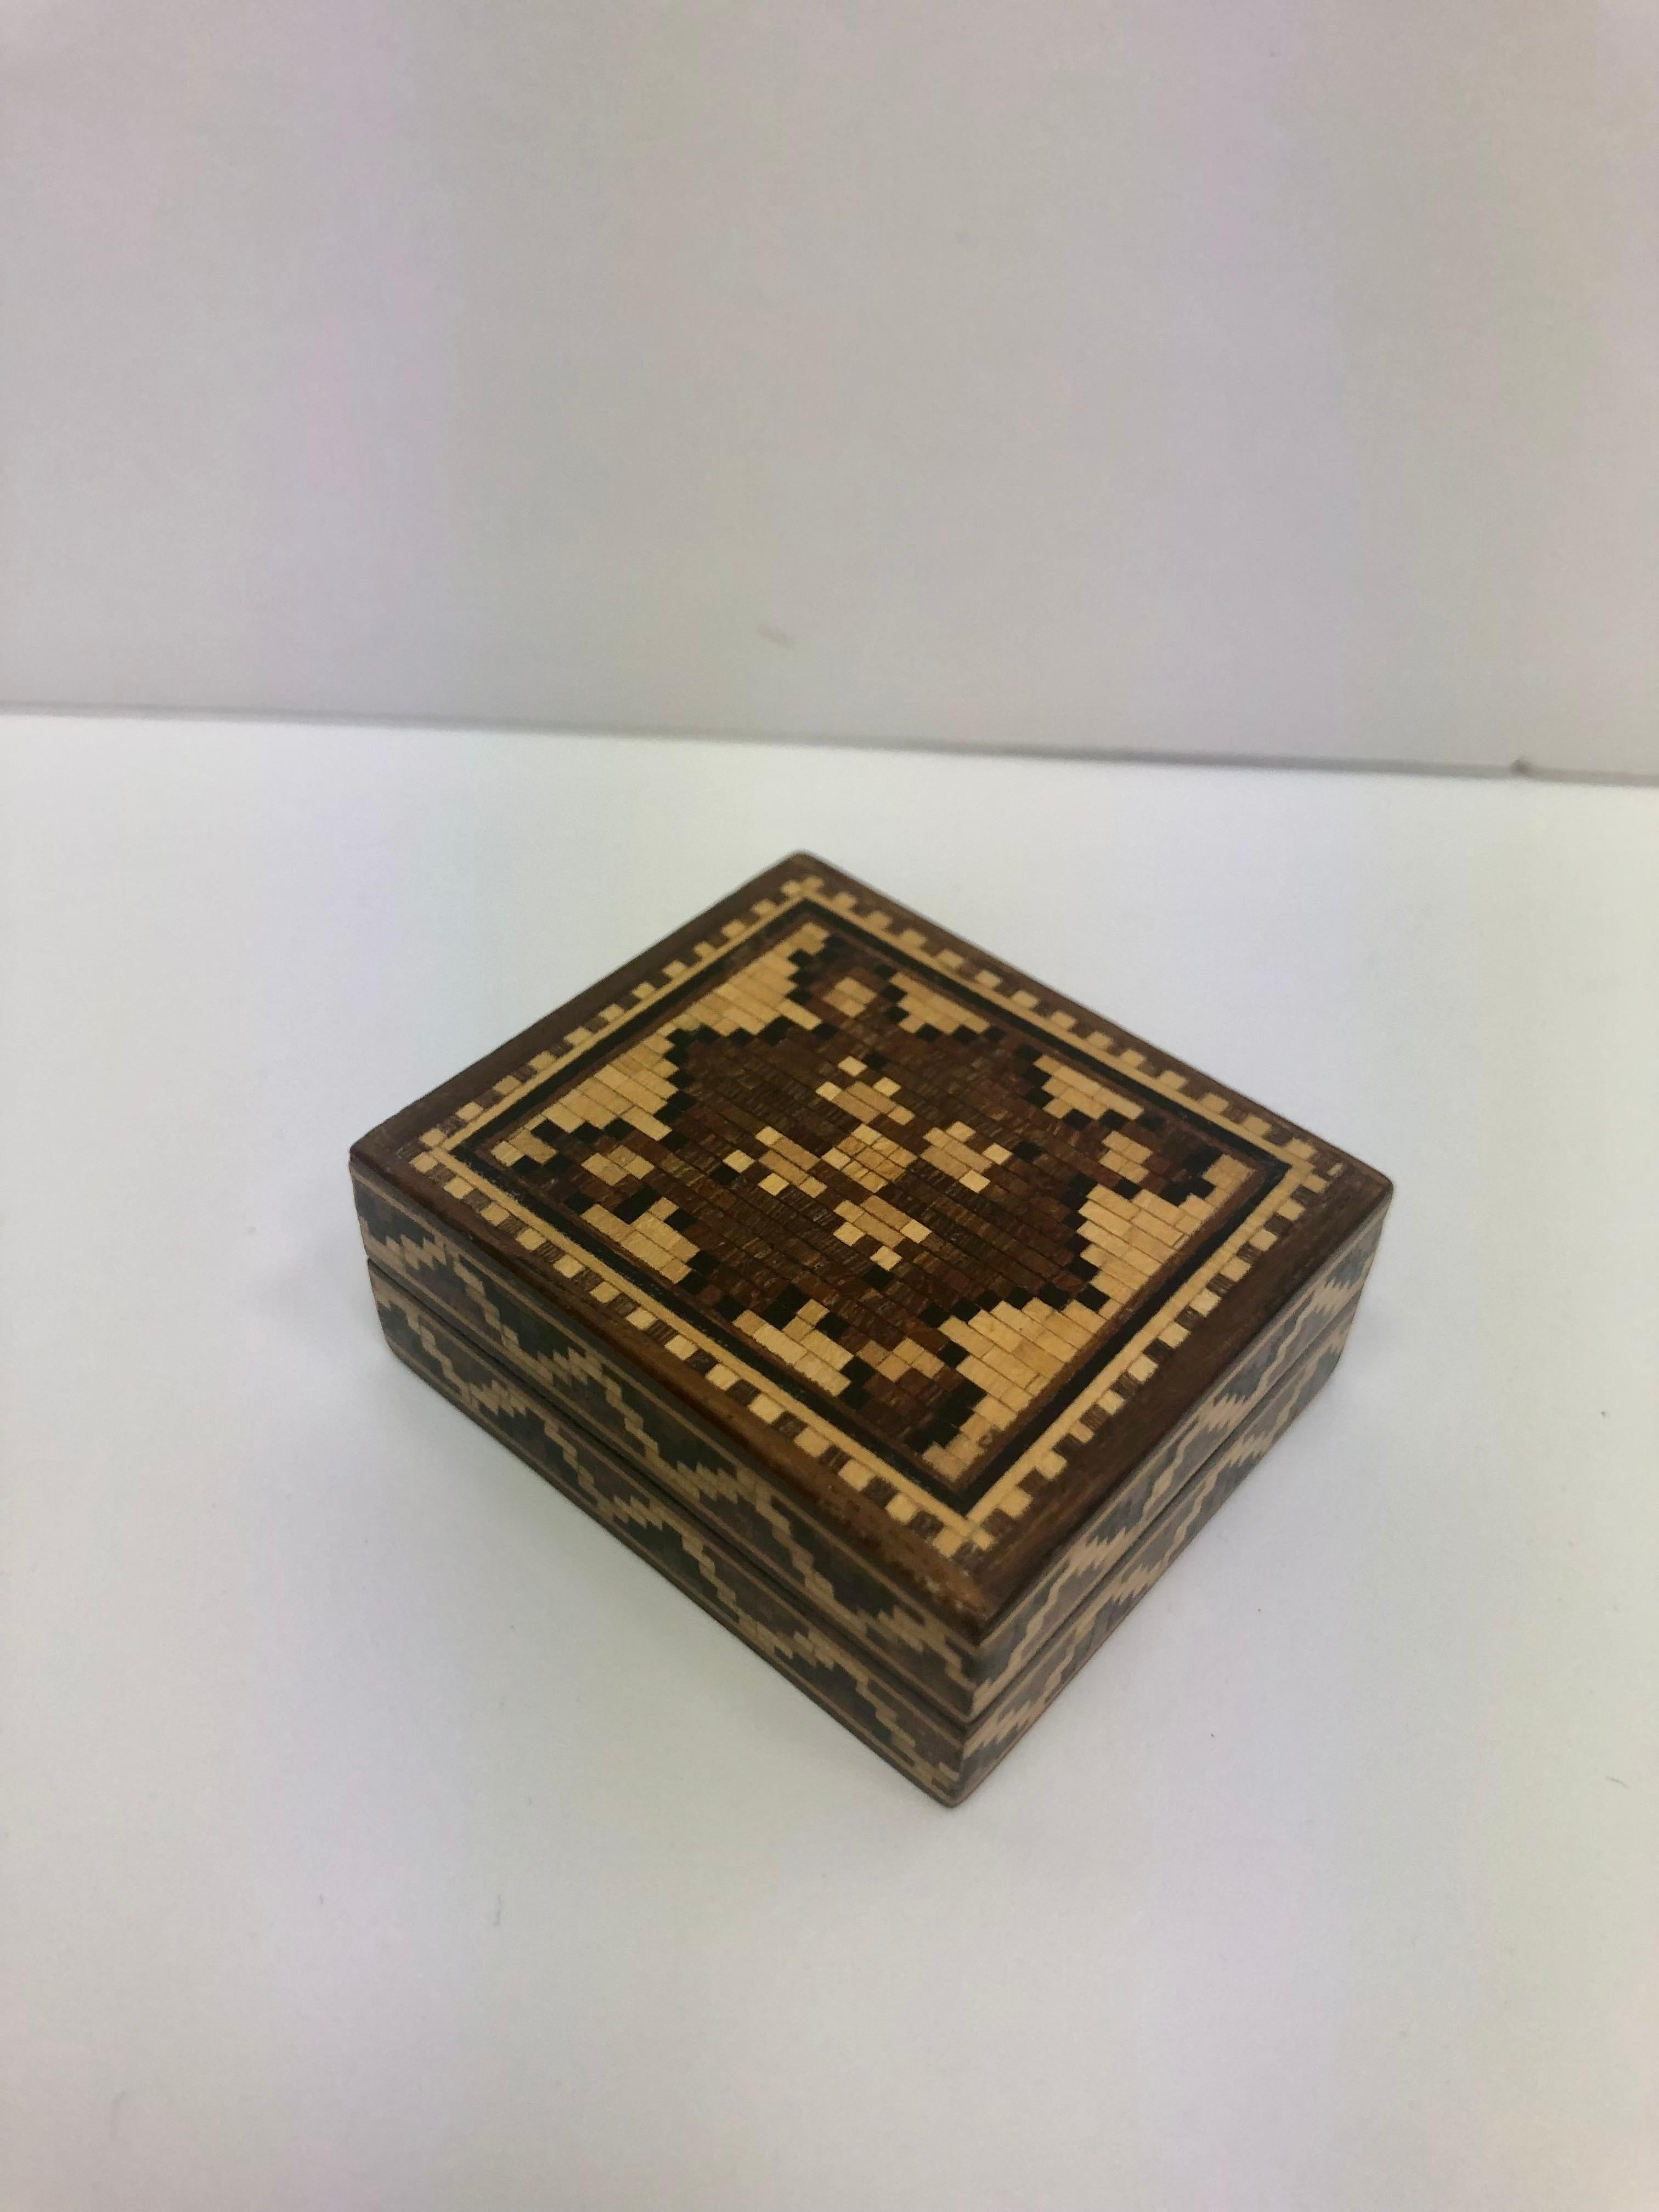 Tunbridge wooden trinket box made in England in the 1870s. Tunbridge ware is a form of decoratively inlaid woodwork, typically in the form of boxes, that is characteristic of Tonbridge and the spa town of Royal Tunbridge Wells in Kent in the 18th